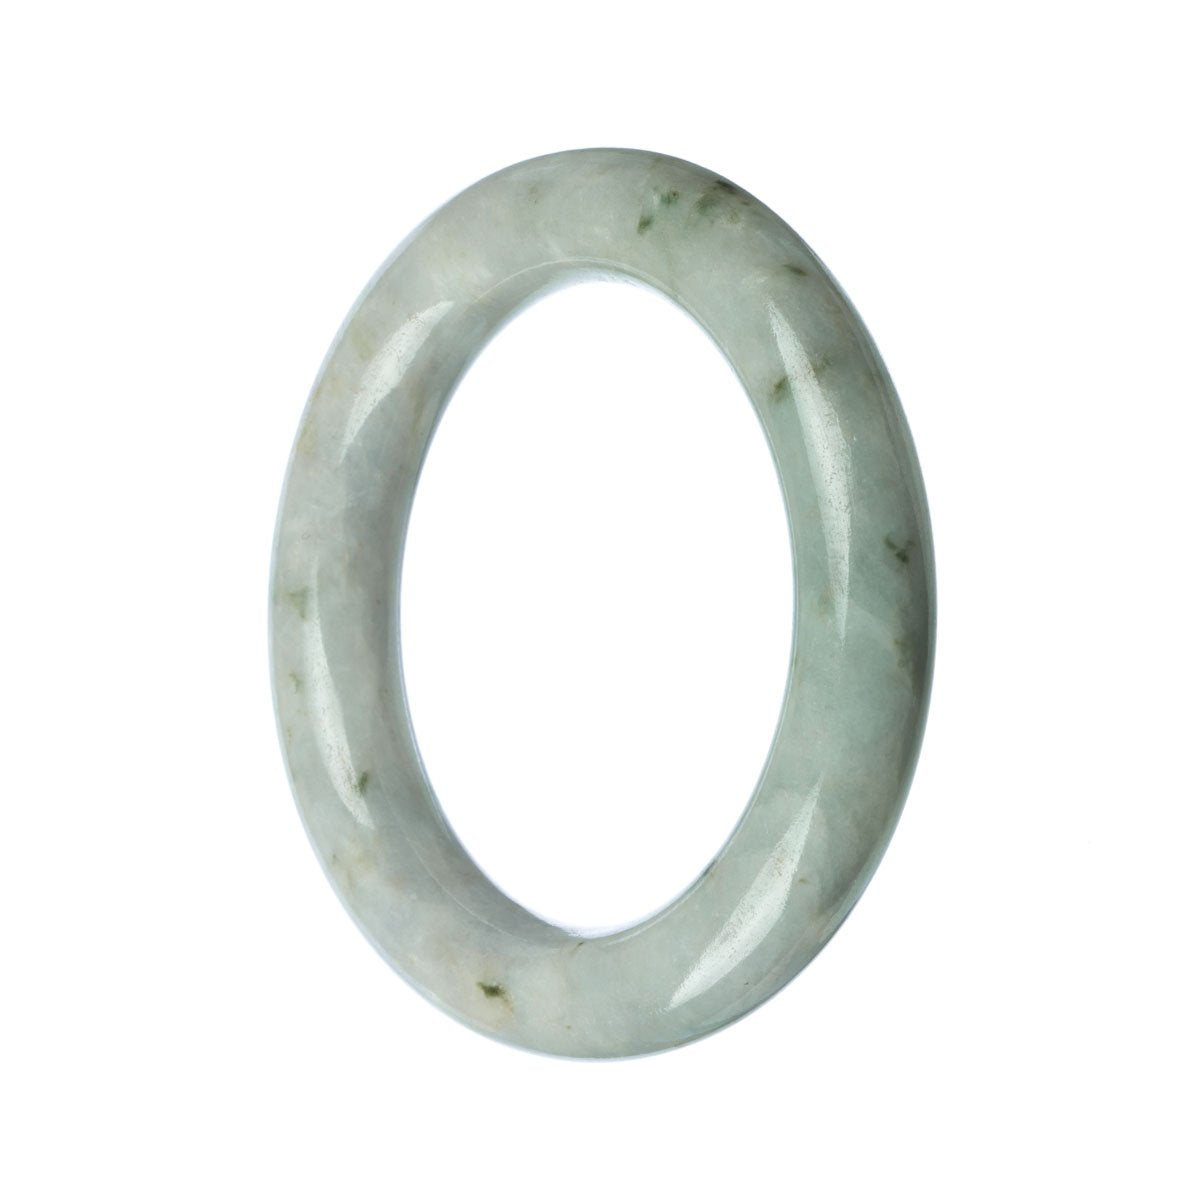 A close-up image of a round, white traditional jade bangle bracelet with a 57mm diameter. The bracelet is made of genuine grade A jade, known for its high quality and natural beauty. The smooth surface of the bangle reflects light, showcasing the intricate patterns and variations in the jade. This timeless piece, offered by MAYS GEMS, is both elegant and stylish, making it a perfect accessory for any occasion.